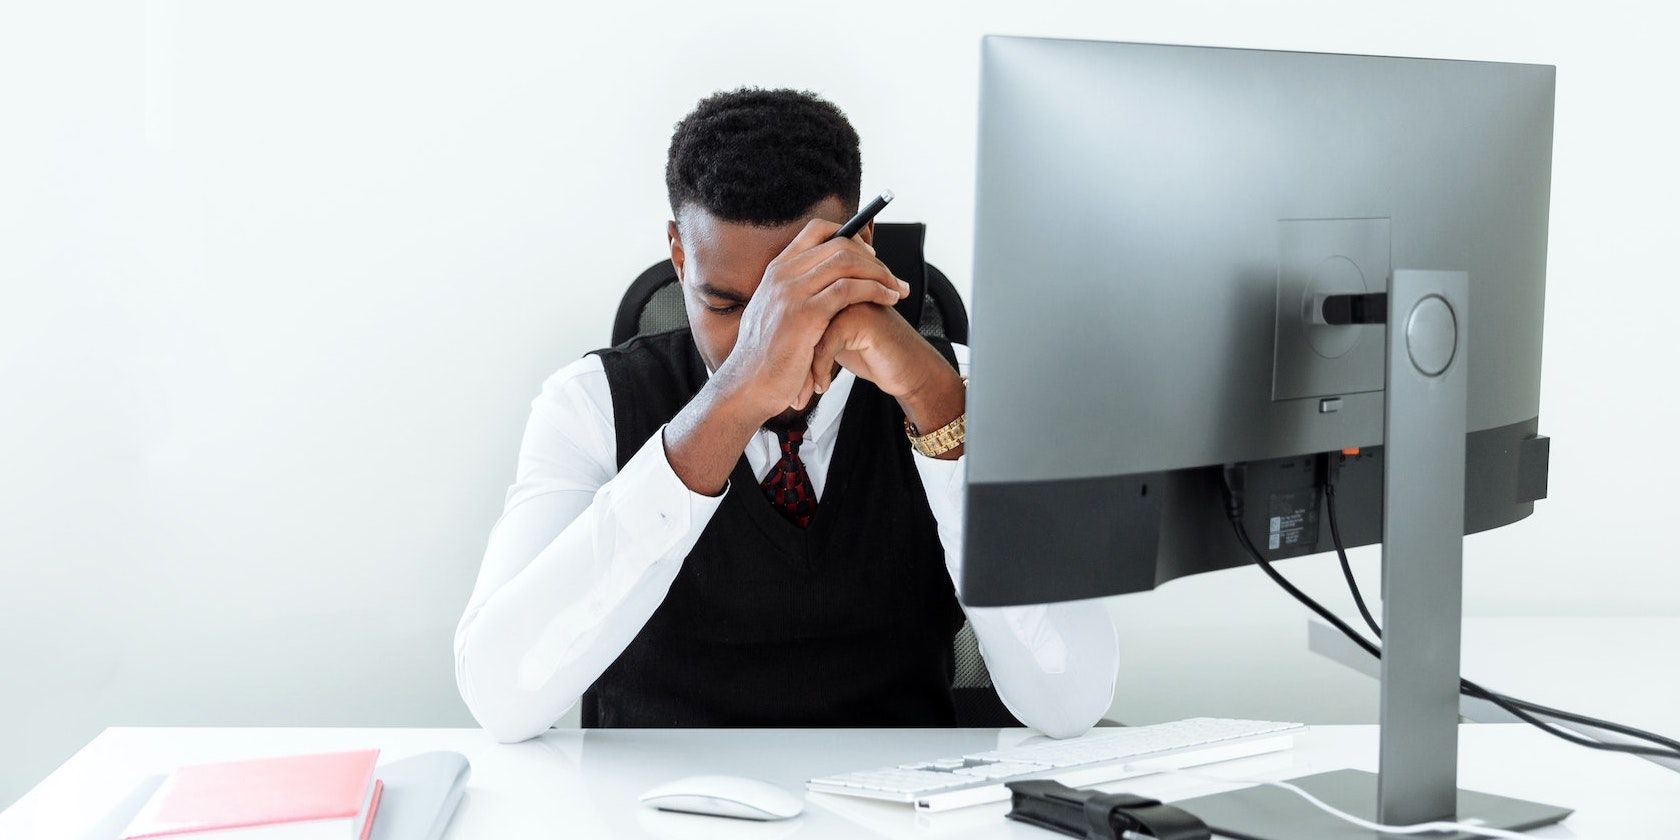 Man looking stressed sitting in front of the pc